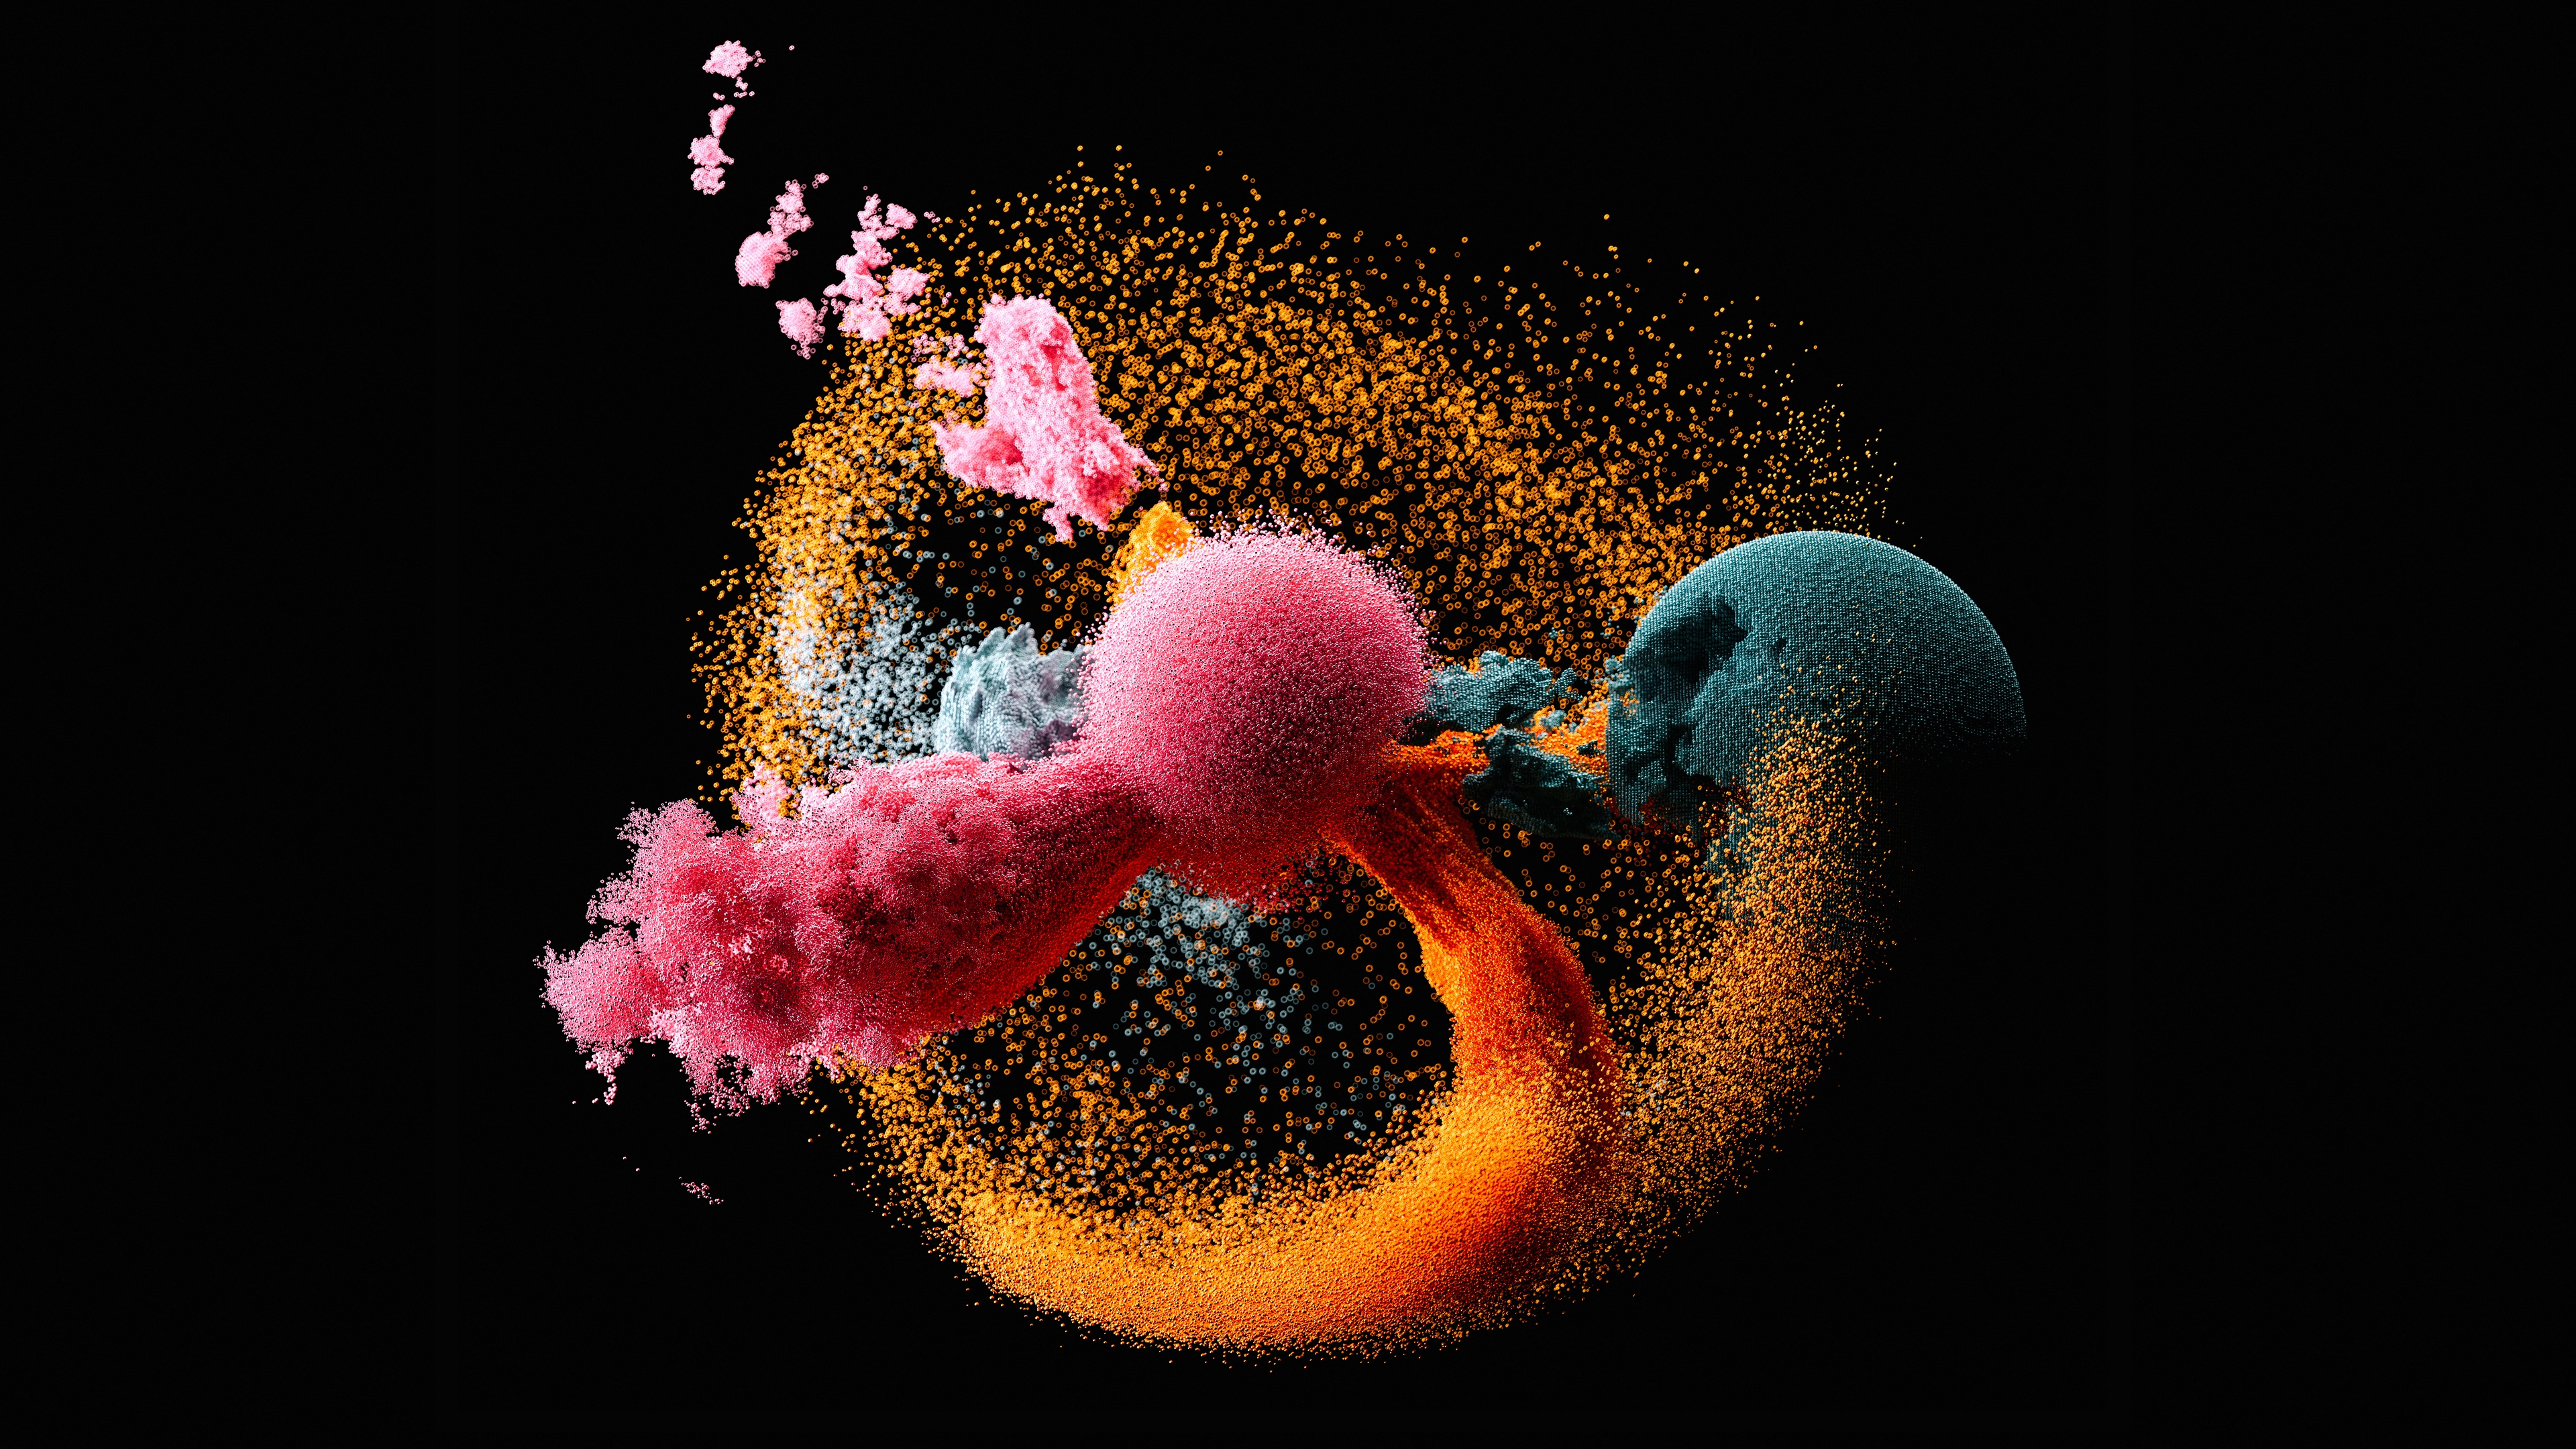 Abstract Dark Background Colorful Artwork Digital Art Explosion Simple Background Black Background 3 3840x2160